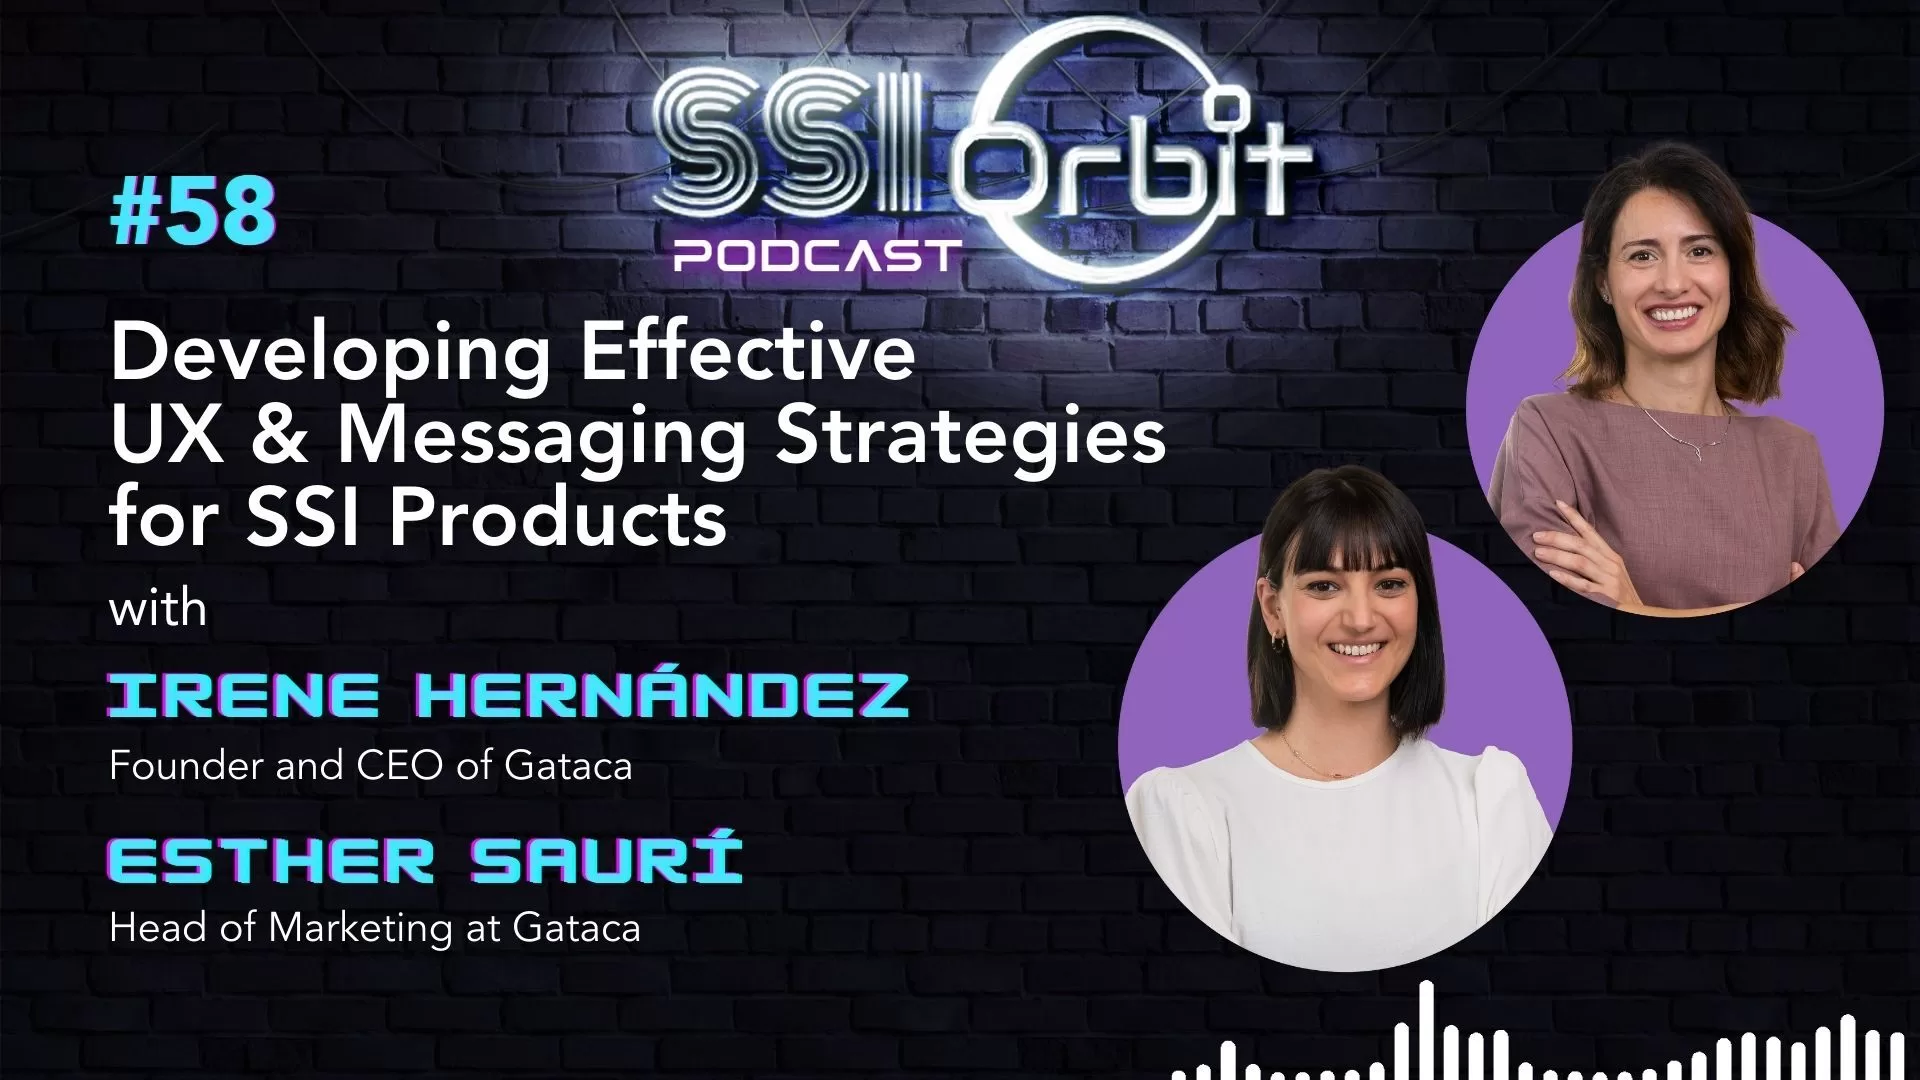 Developing Effective UX & Messaging Strategies for SSI Products (with Irene Hernández & Esther Saurí)